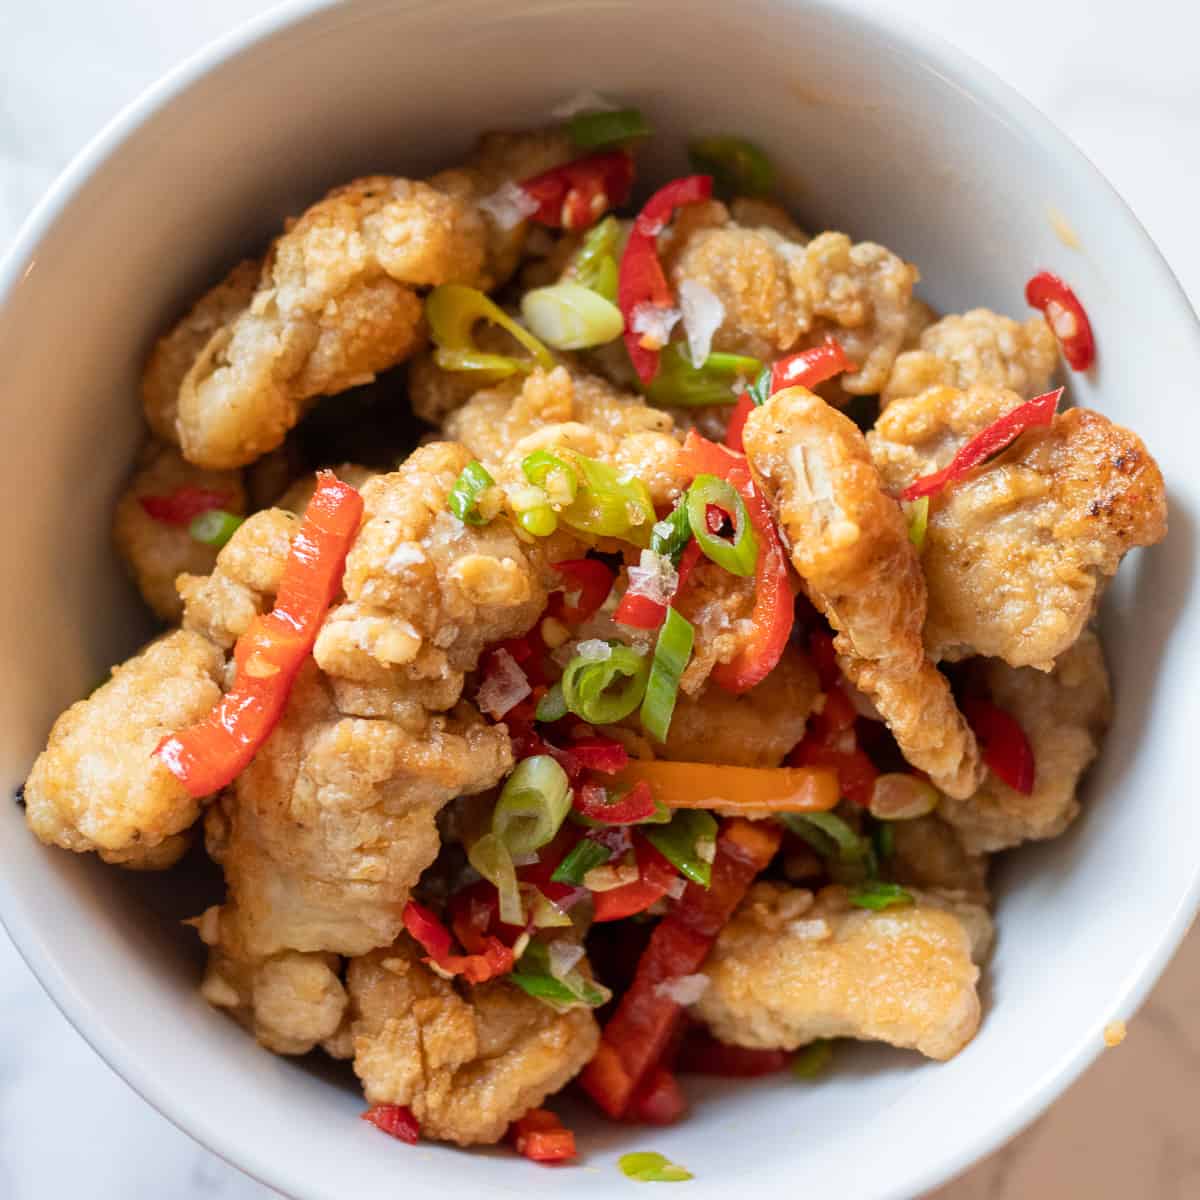 salt and pepper chicken served in a bowl